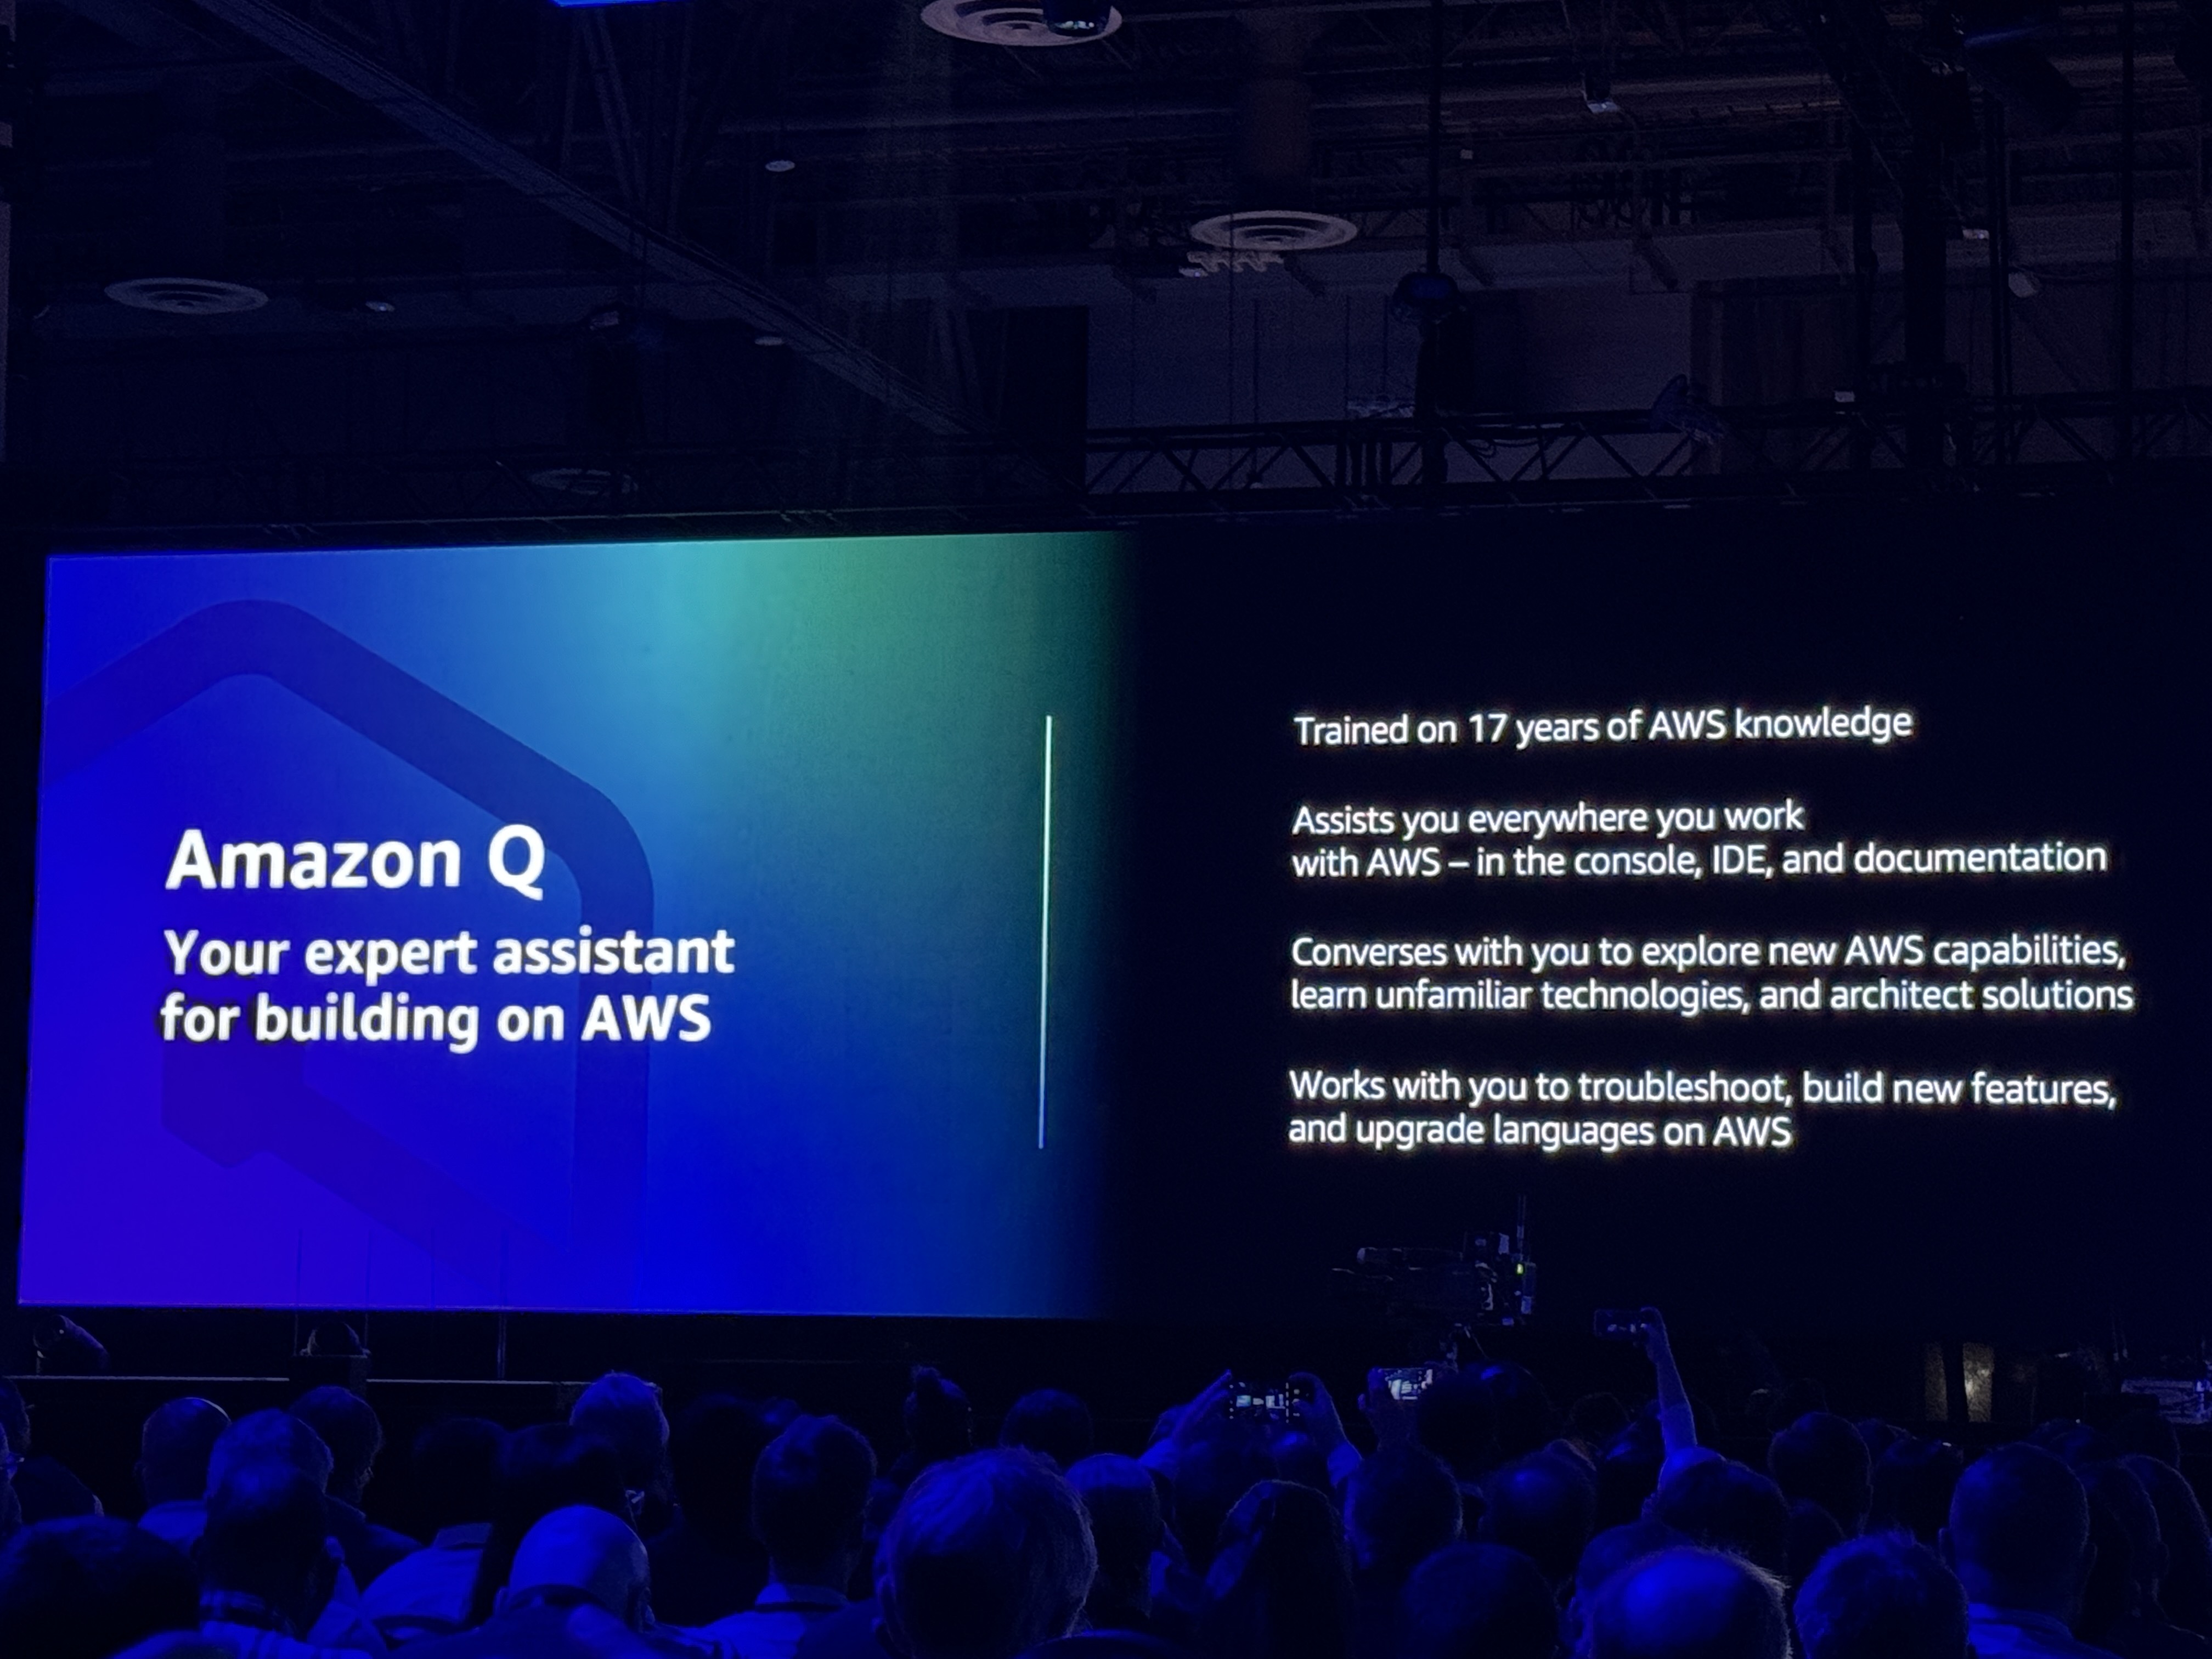 Amazon Q showcased on stage at AWS re:Invent